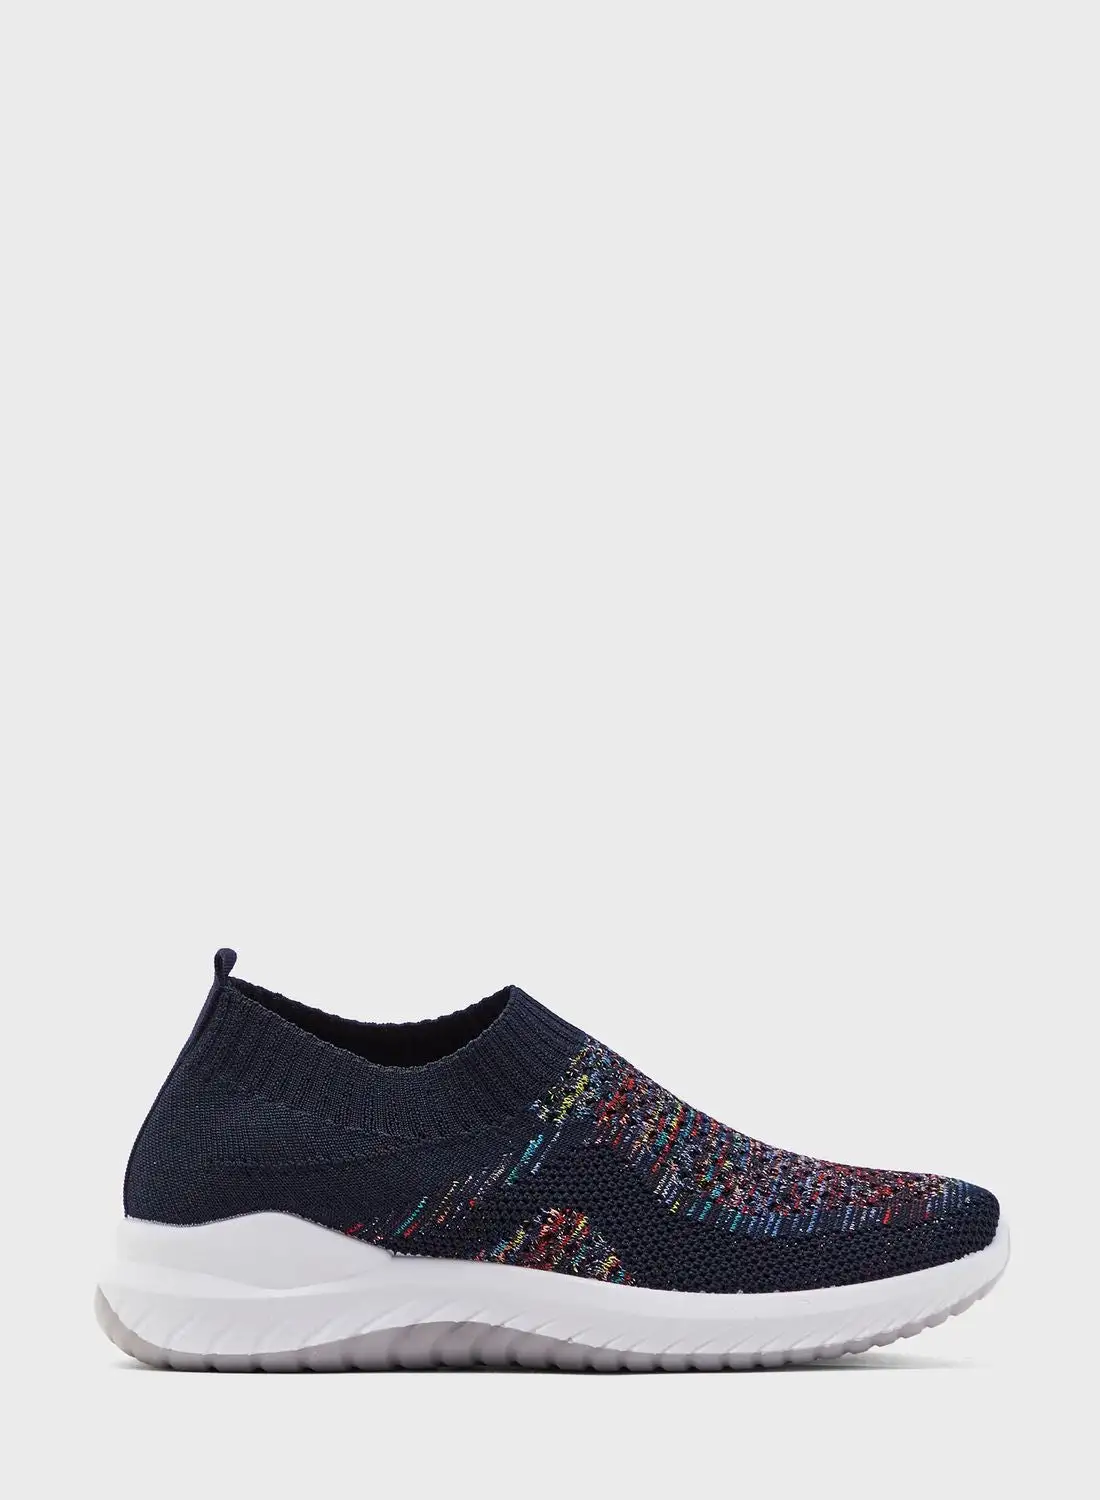 Ginger Breathable Knit Pull On Comfort Shoes